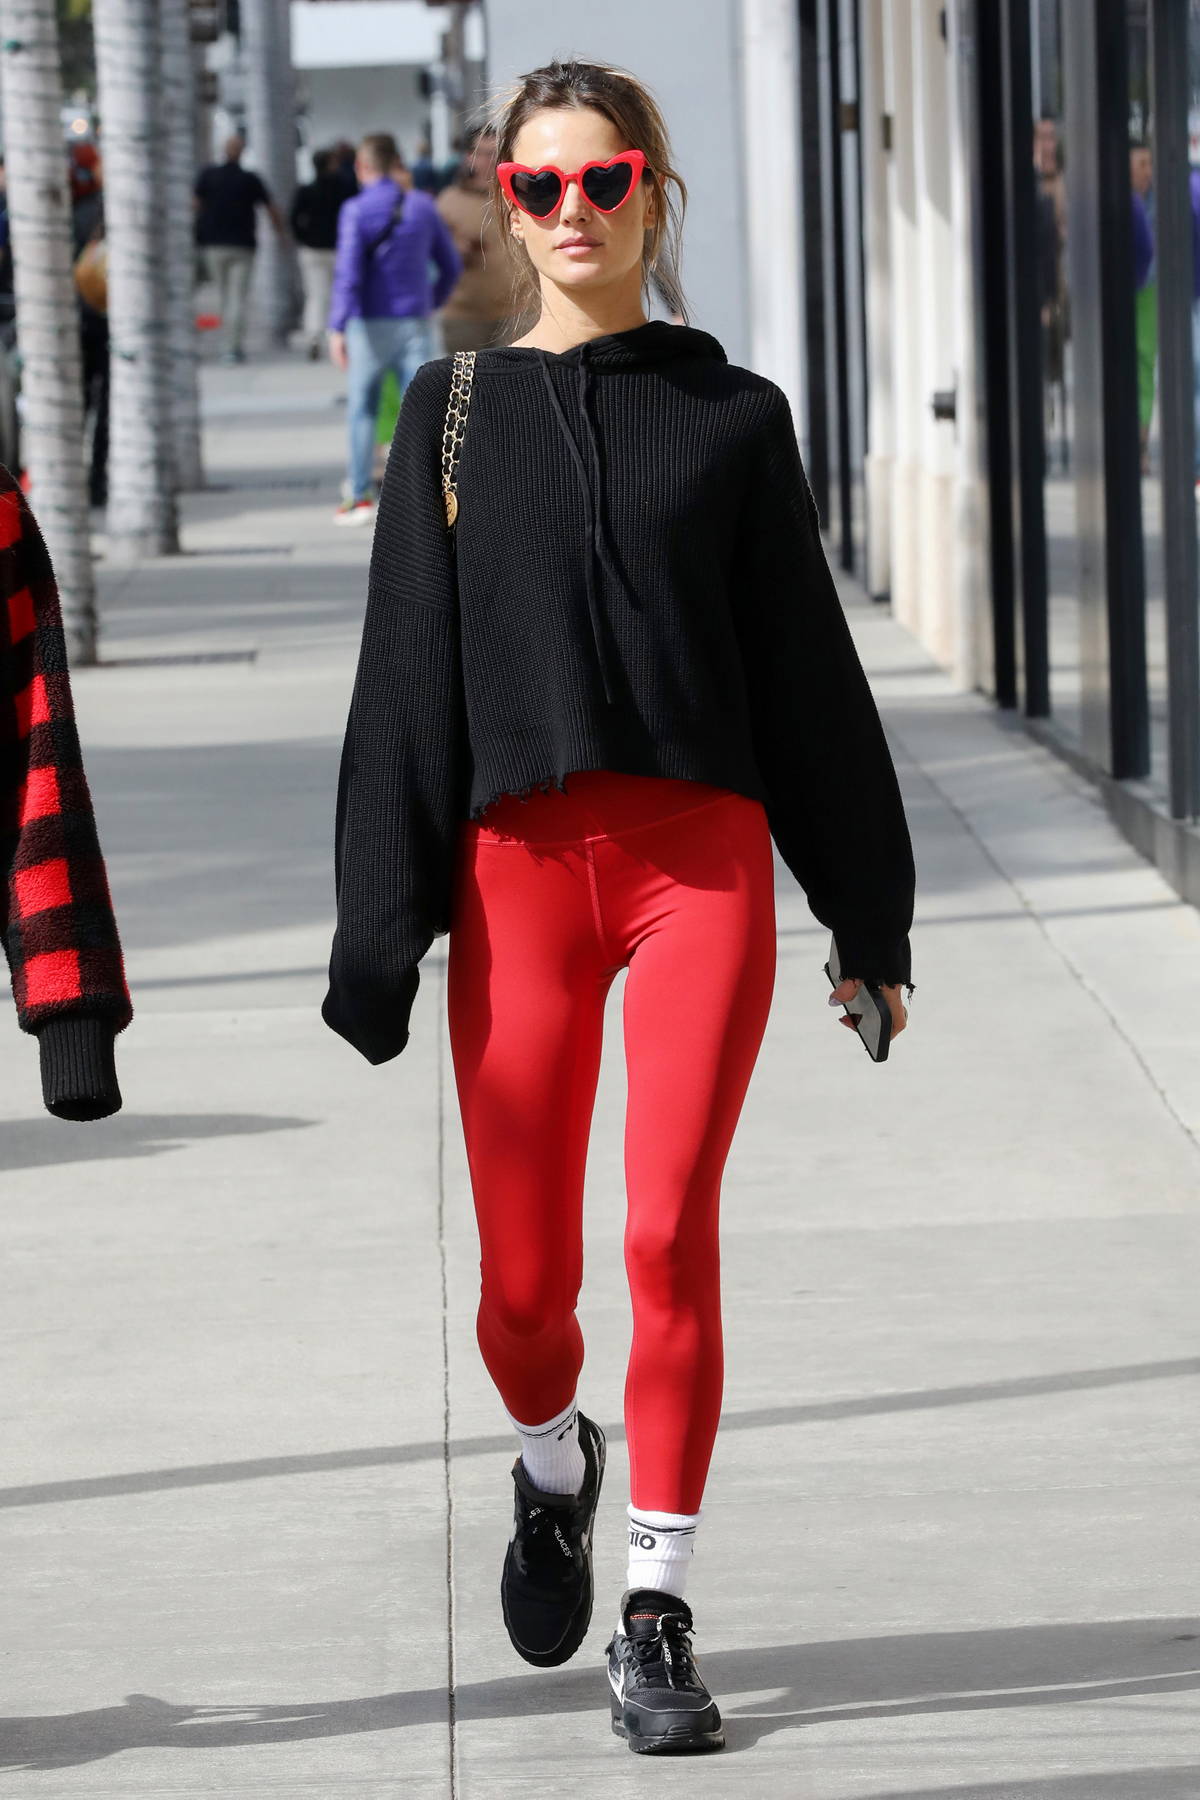 Alessandra Ambrosio rocks red leggings with matching heart shape sunglasses  while out on Valentine's Day in